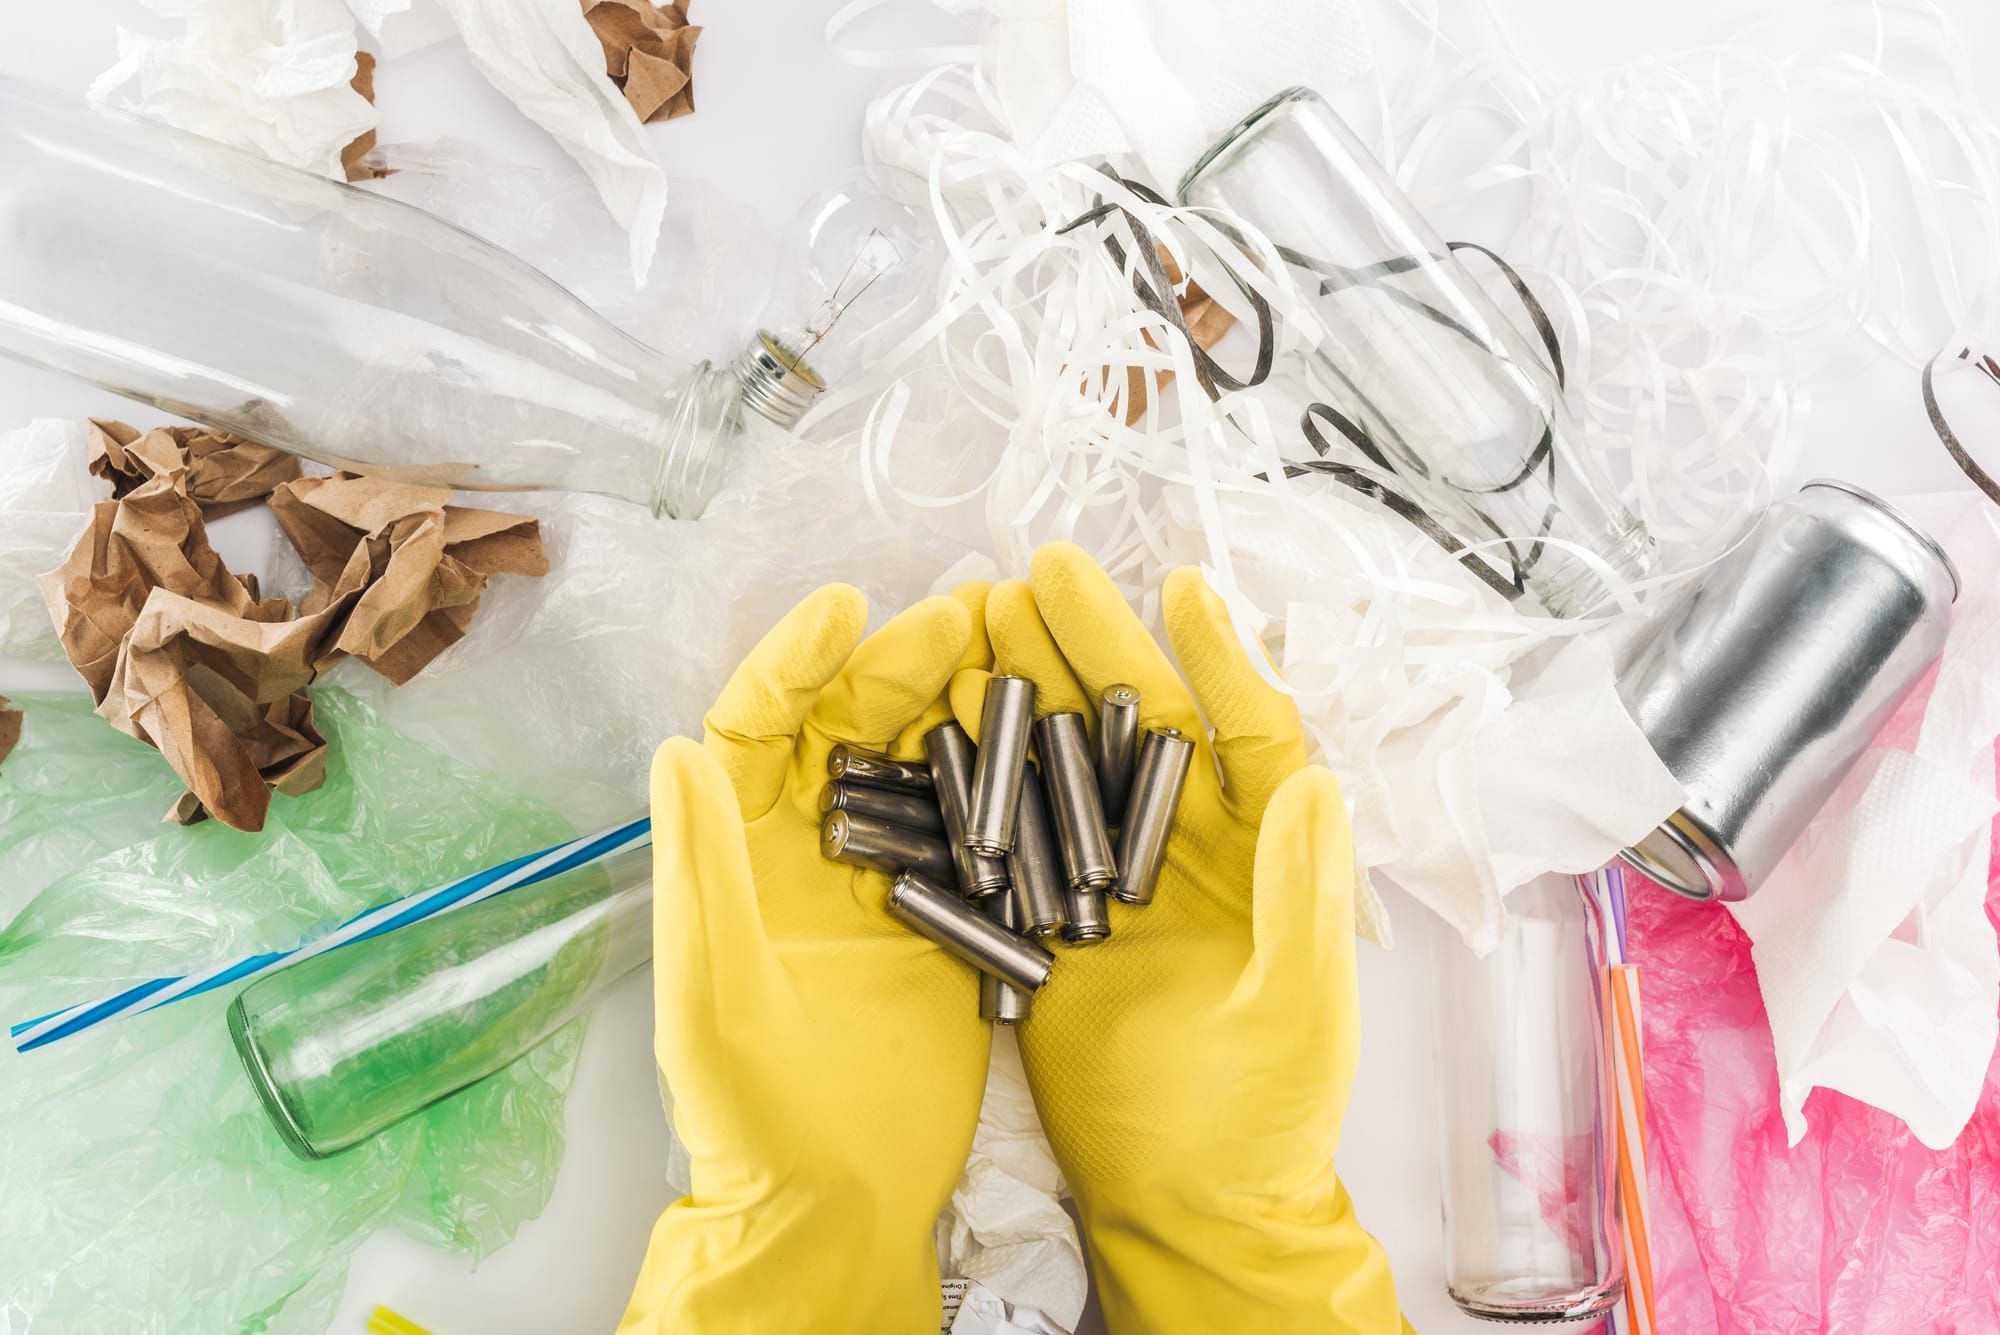 Cropped view of man holding batteries among can, glass bottles, plastic bags, paper strips, paper and plastic tubes